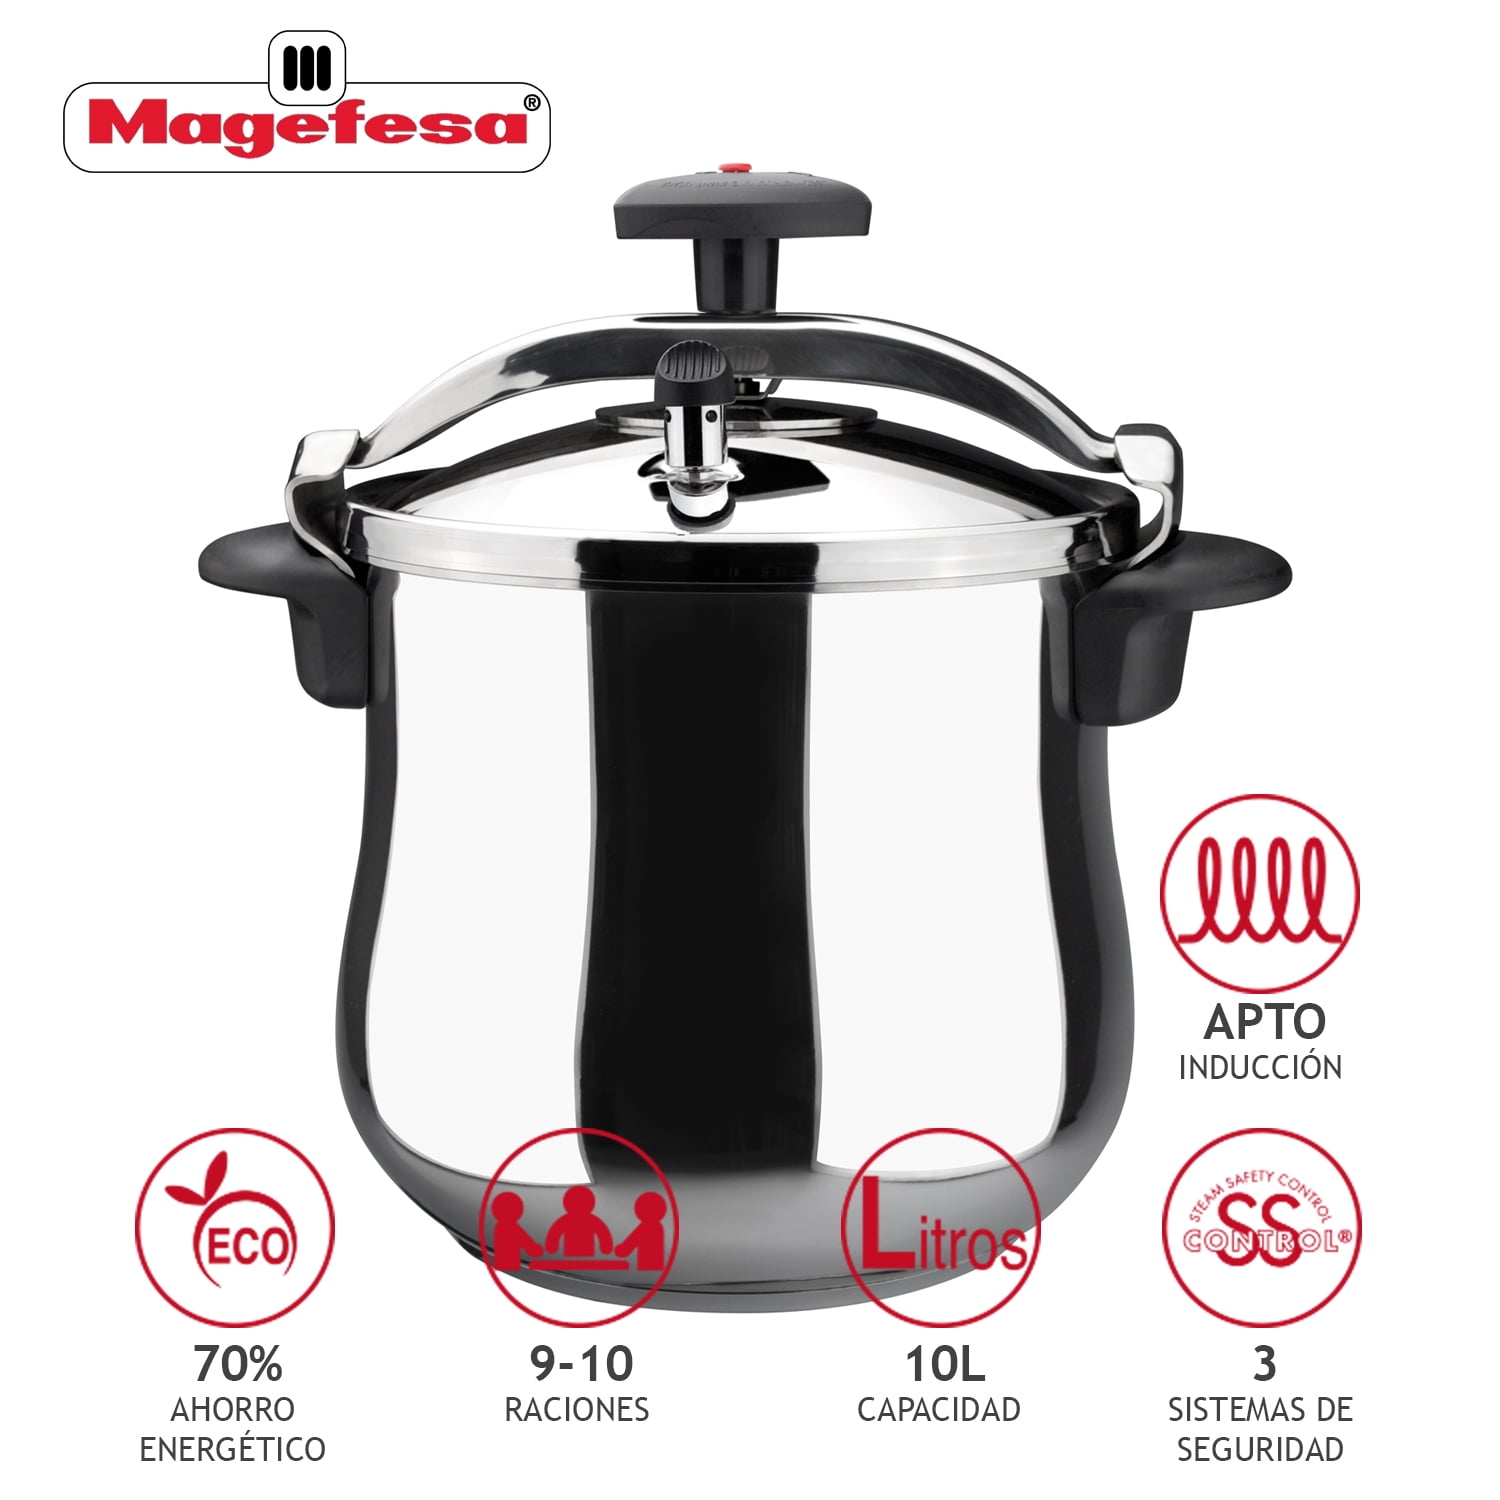 Magefesa Star 10 Qt. Stainless Steel Stovetop Pressure Cookers 01OPSTACO10  - The Home Depot